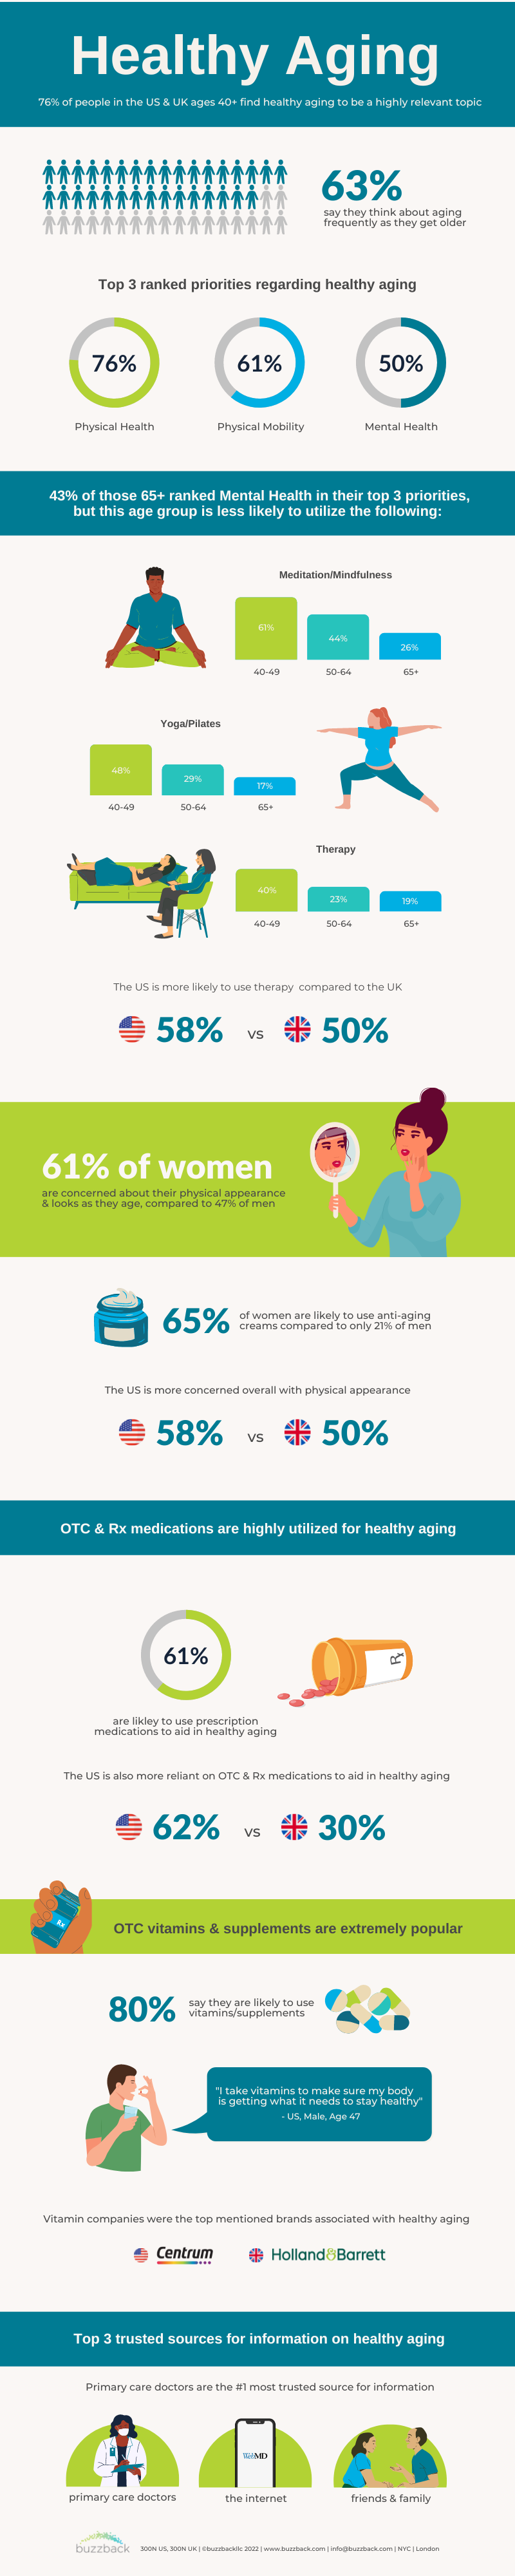 Healthy Aging (800 × 3000 px) (800 × 4000 px)